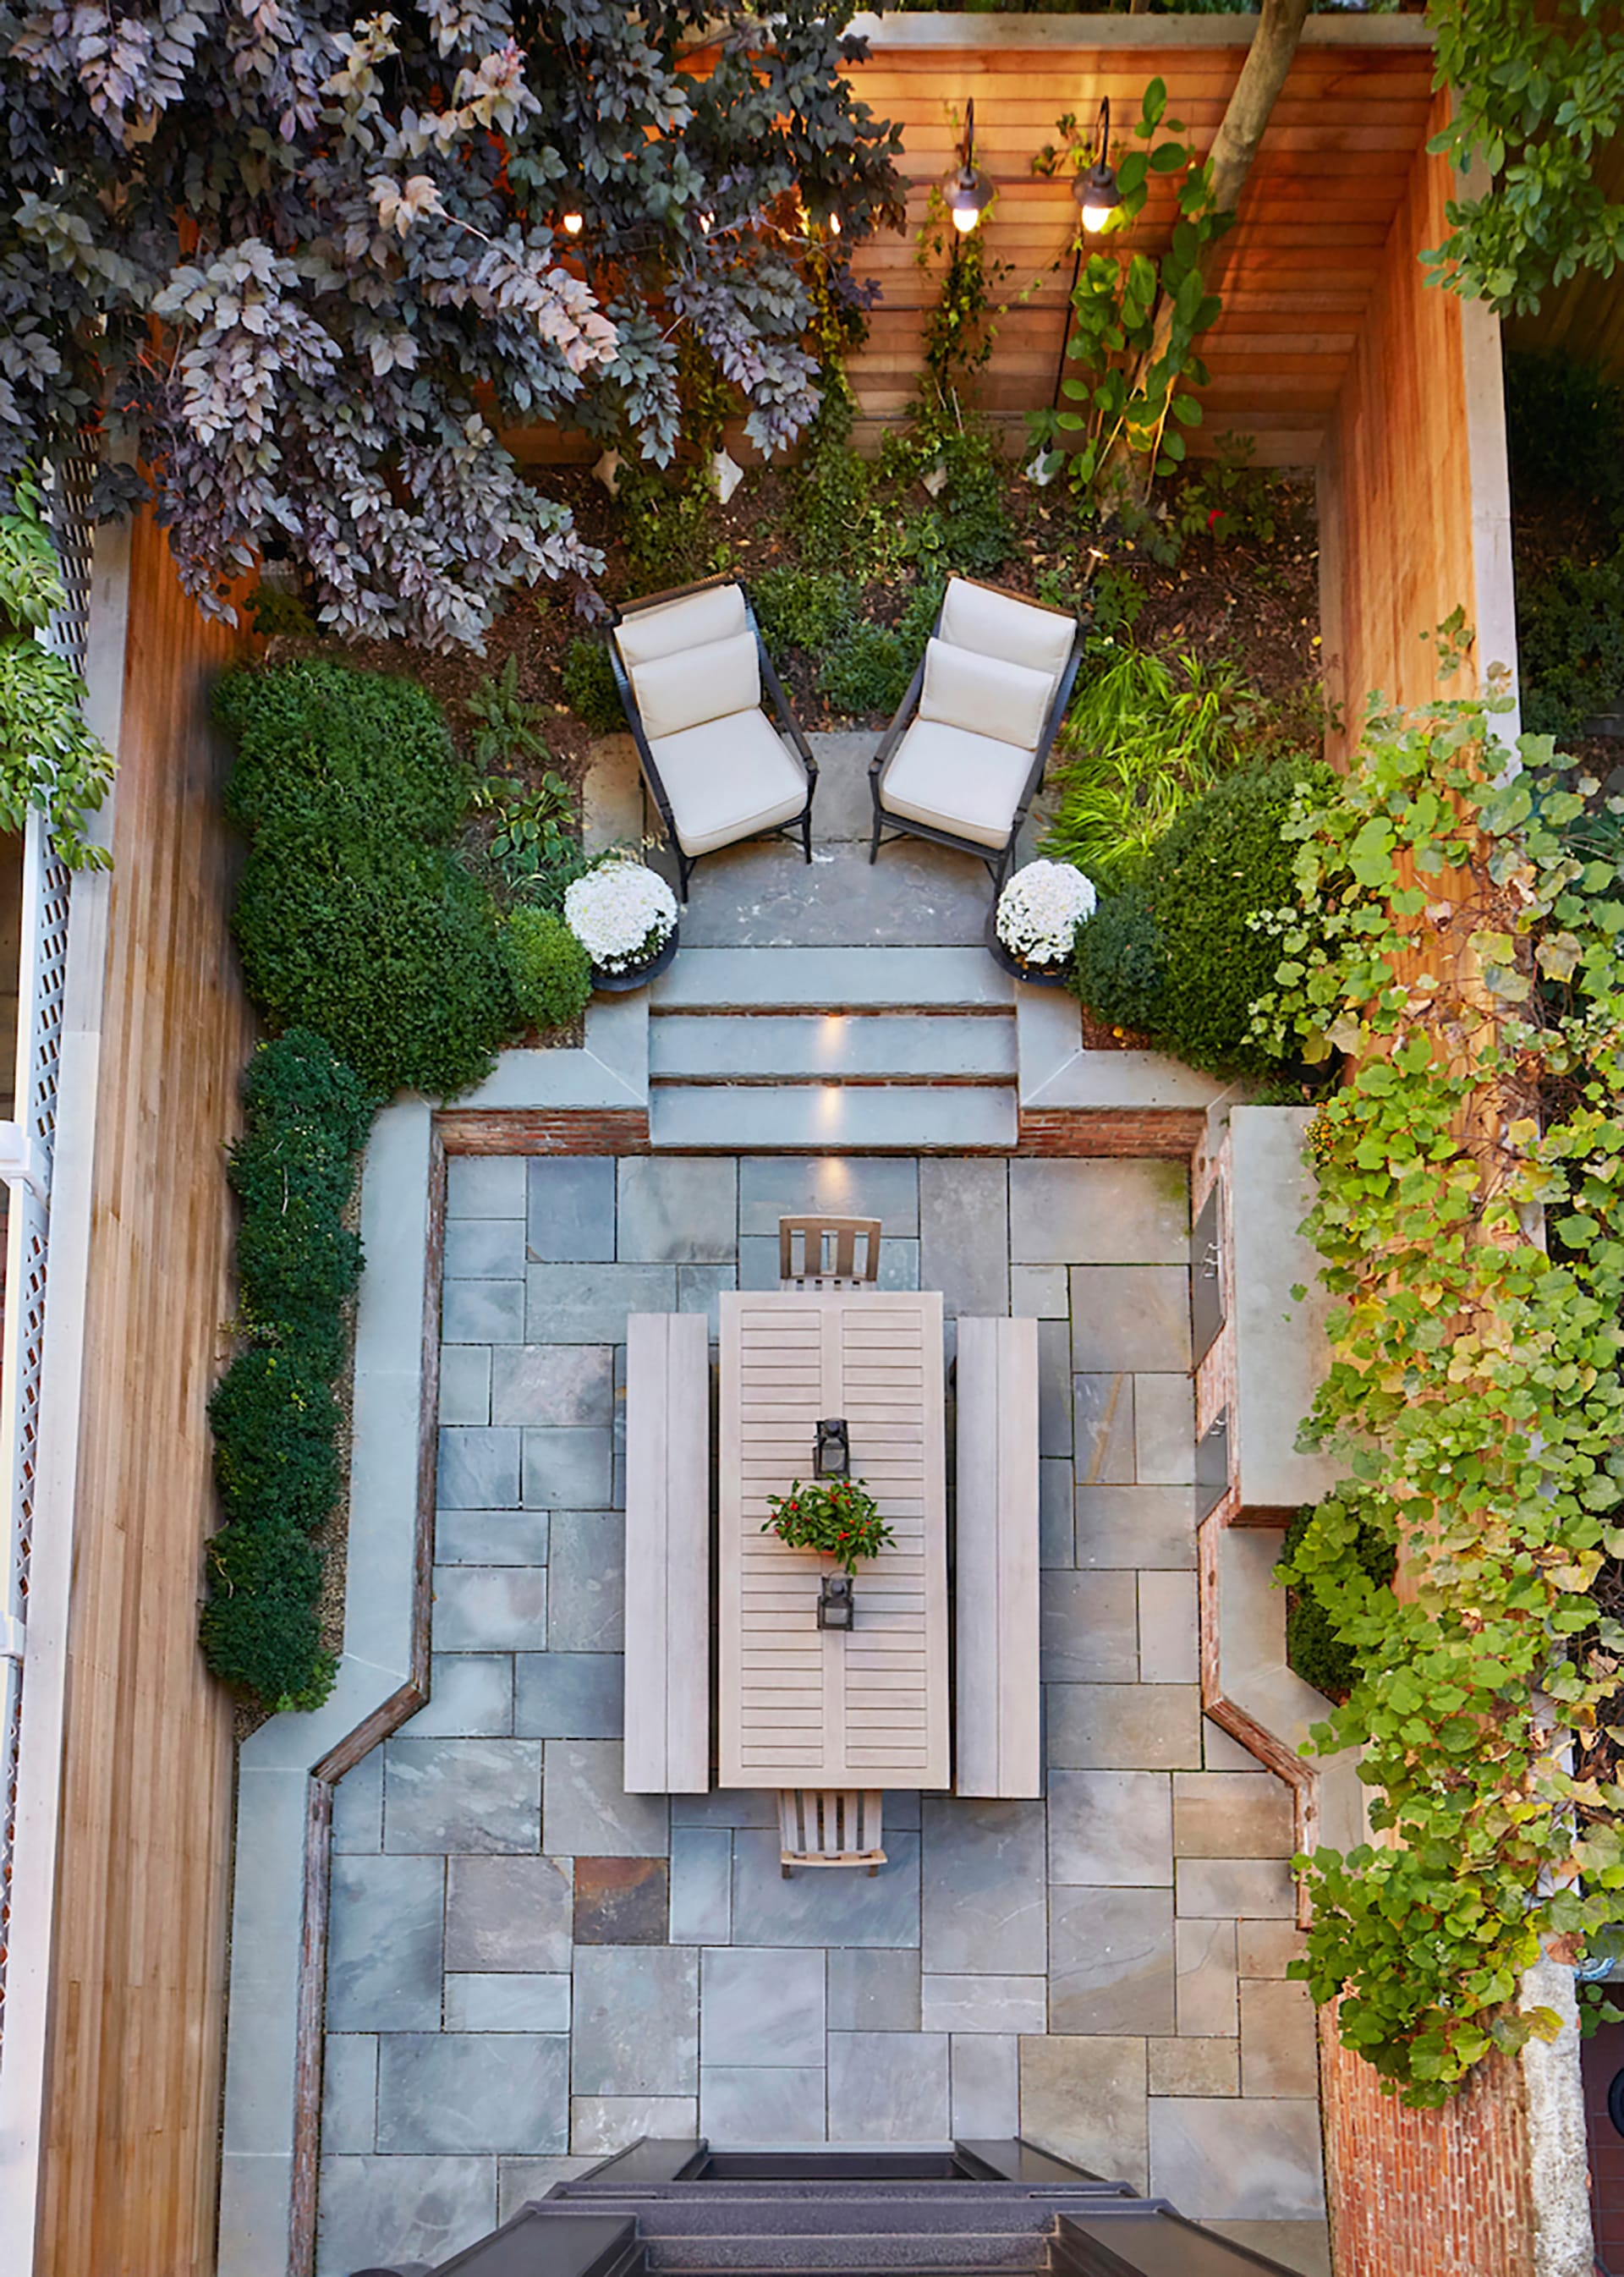 Bird's eye view of a rear yard with planters, a fire pit, and wood fence